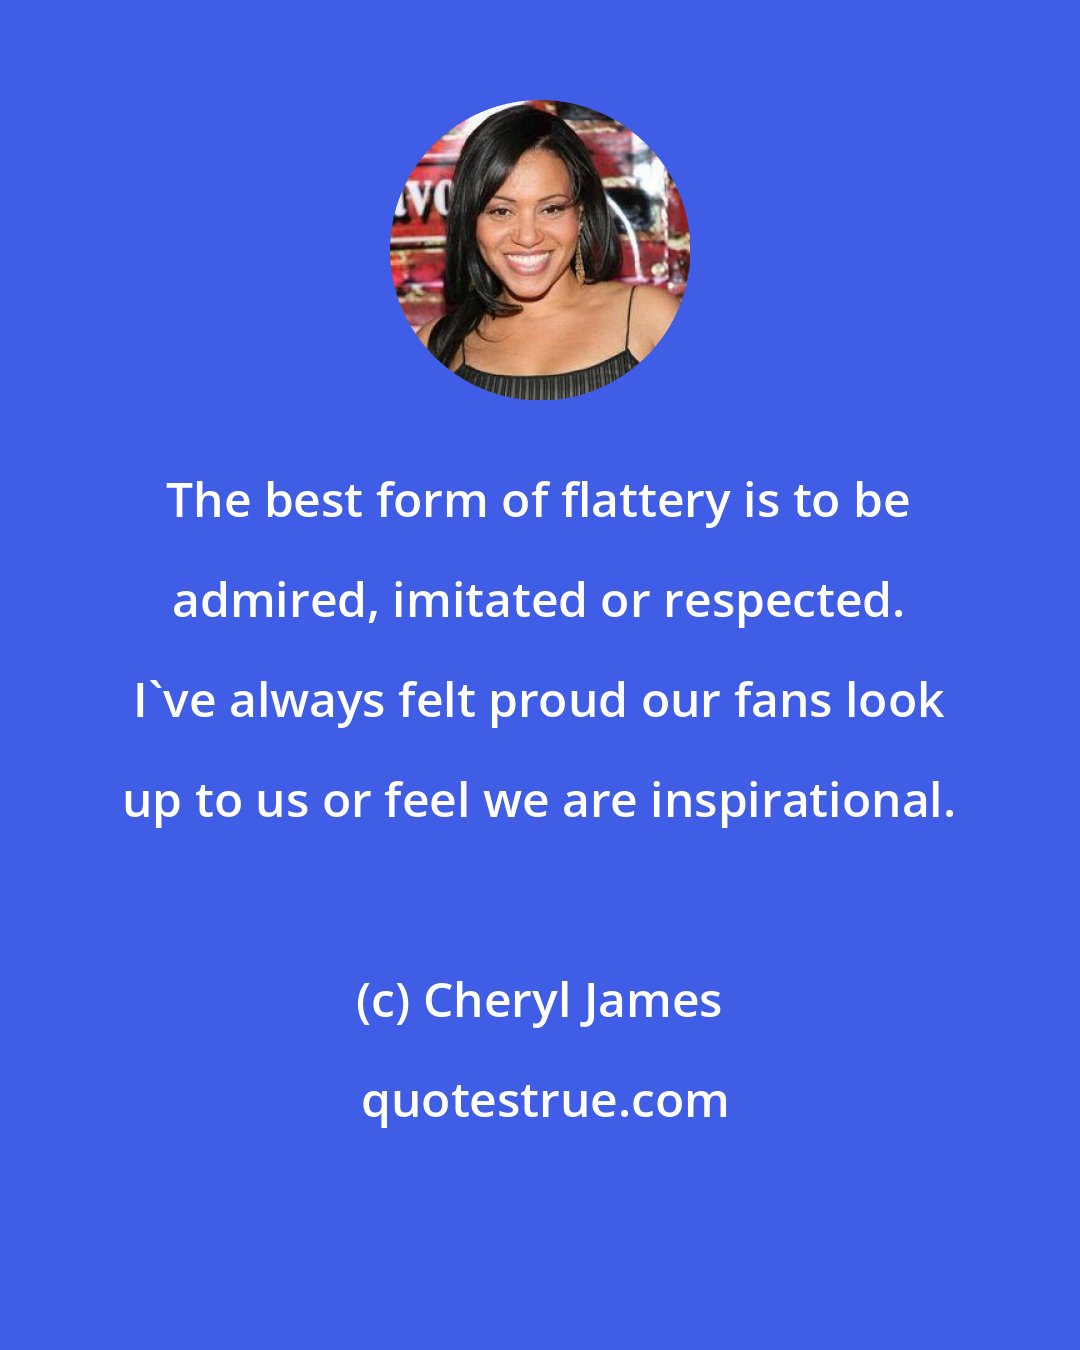 Cheryl James: The best form of flattery is to be admired, imitated or respected. I've always felt proud our fans look up to us or feel we are inspirational.